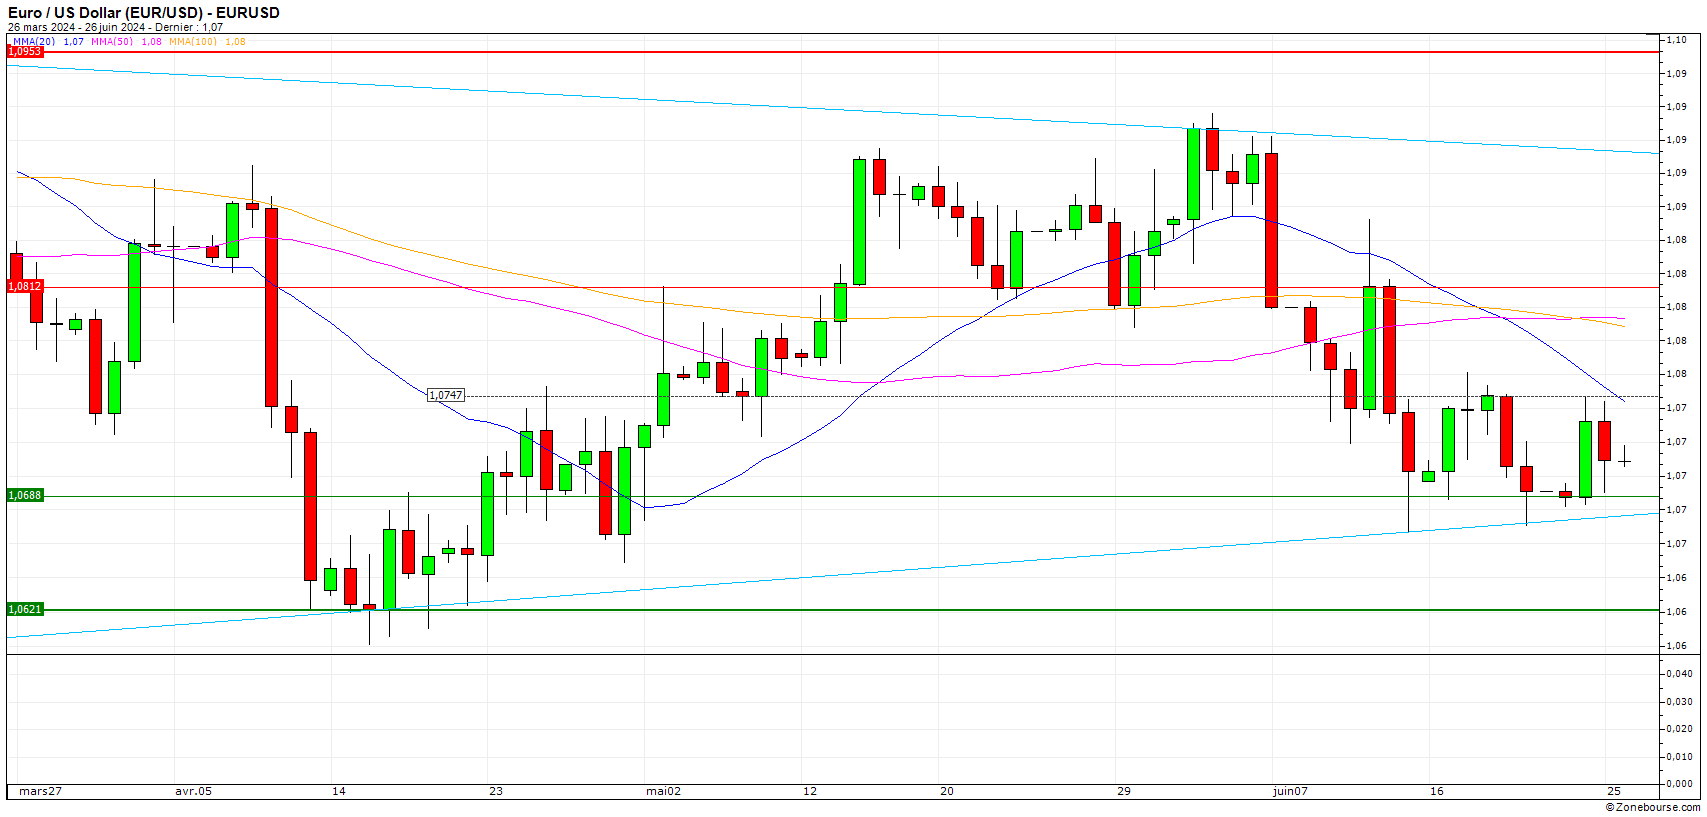 https://www.zonebourse.com/zbcache/charts/ObjectChart.aspx?Name=4591&Type=Custom&Intraday=1&Width=1707&Height=817&Cycle=DAY1&Duration=3&Render=Candle&ShowCopyright=2&ShowVolume=1&ShowName=1